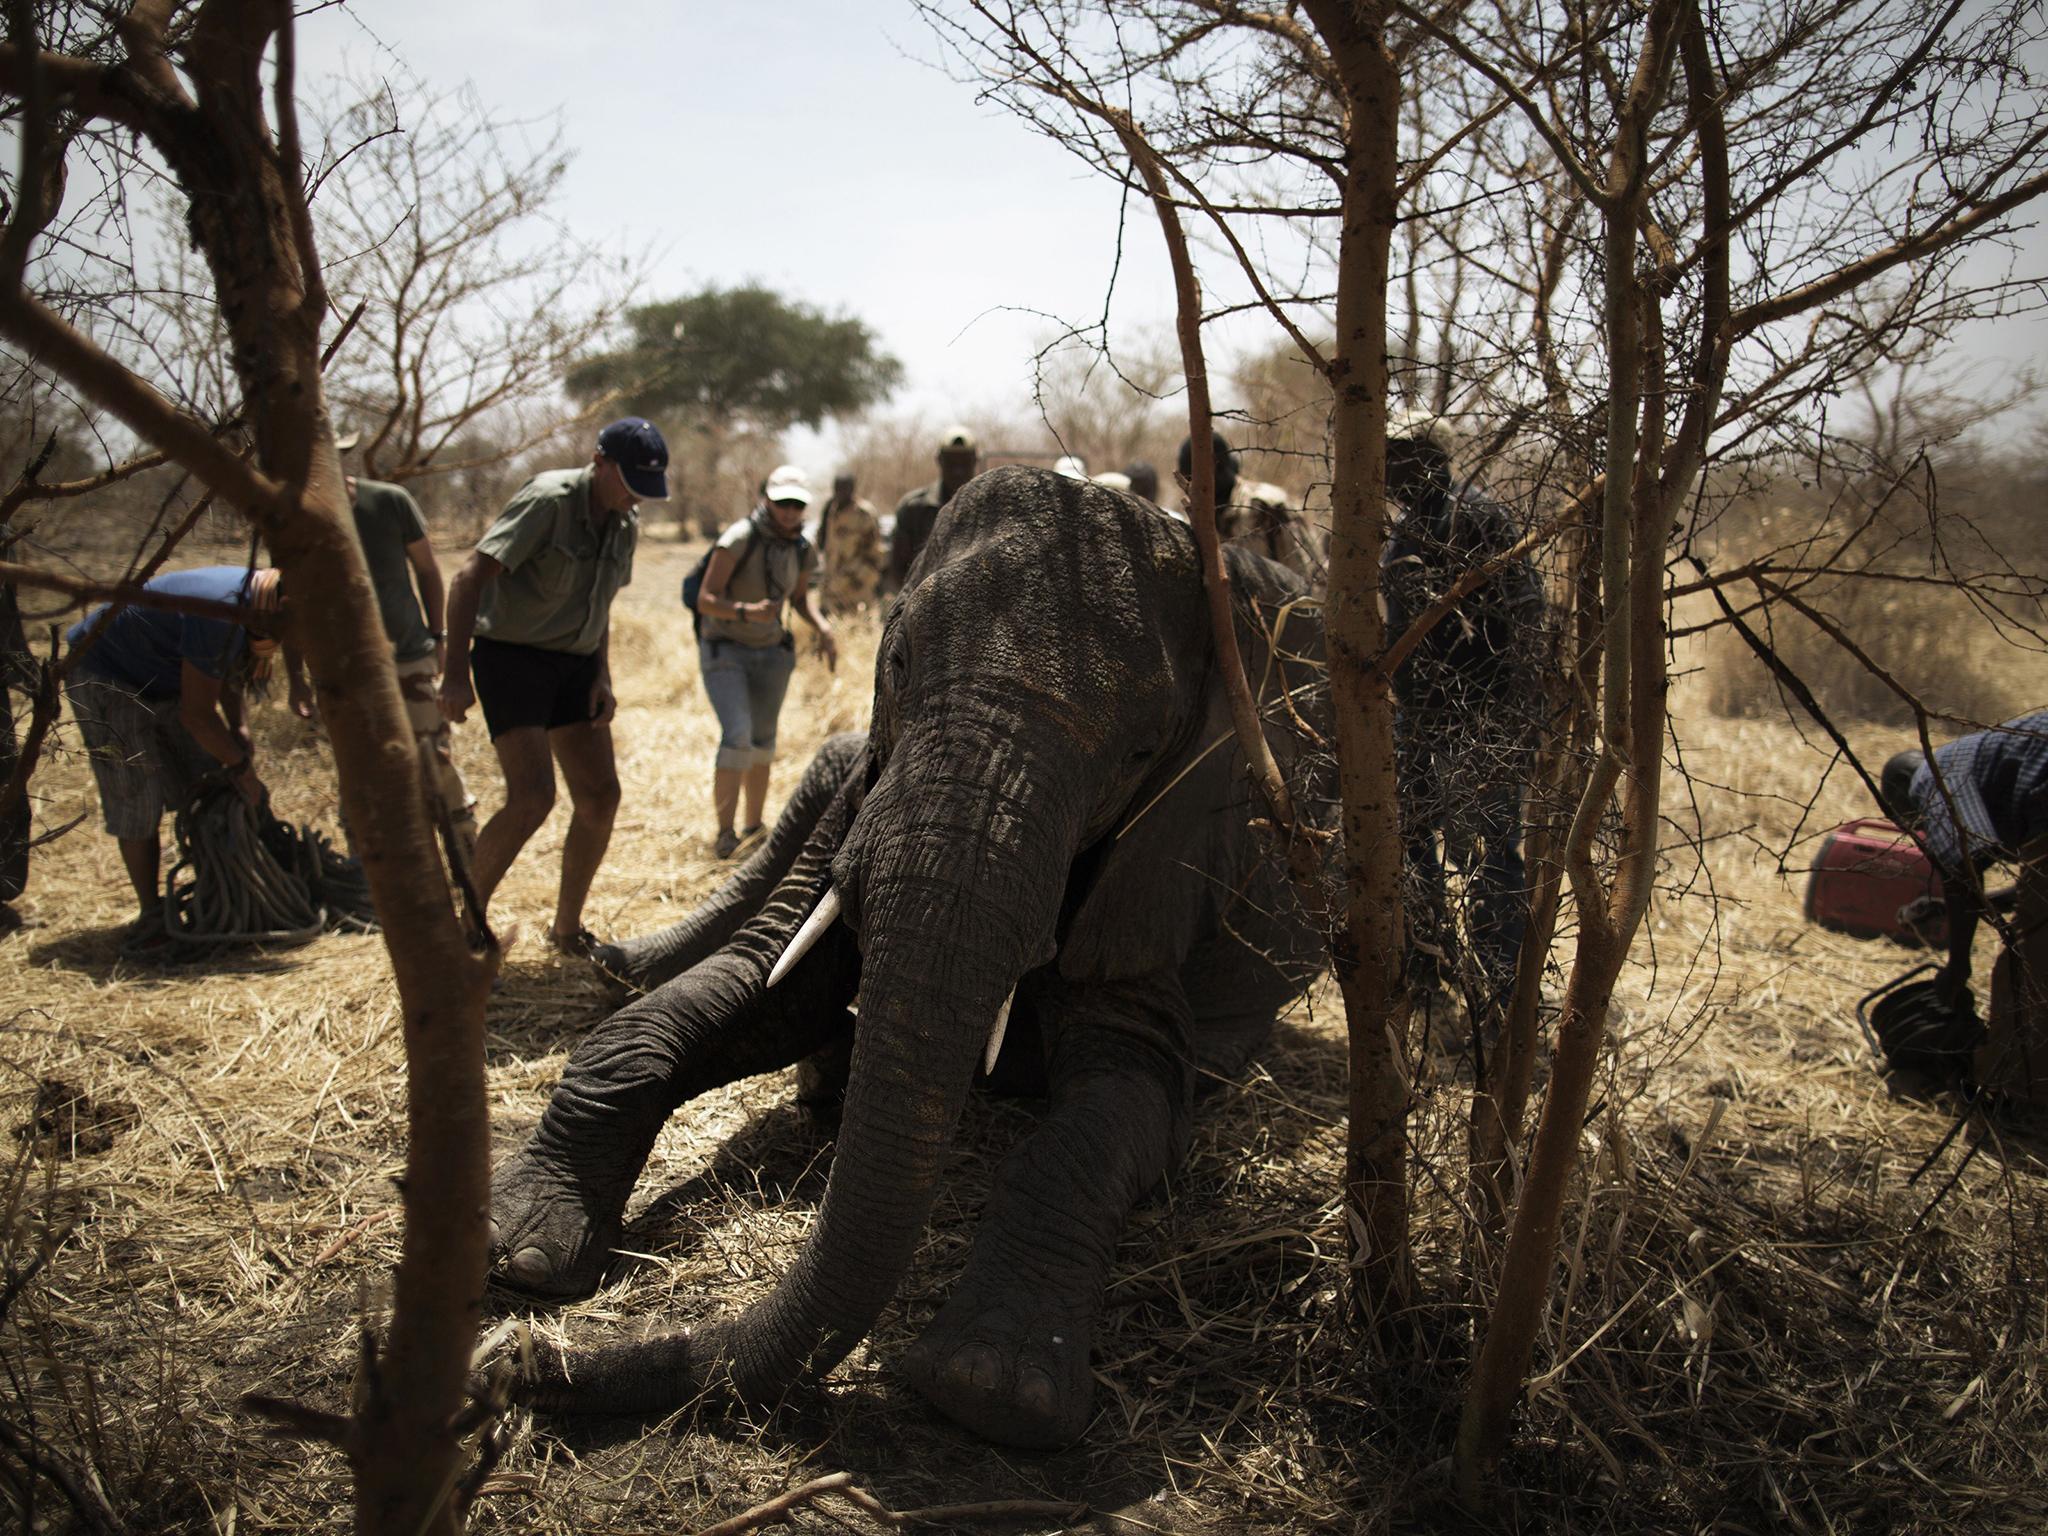 African Parks staff scramble to help an elephant who fell on a dangerous position after being darted during a collaring operation aimed at preserving elephants in the park